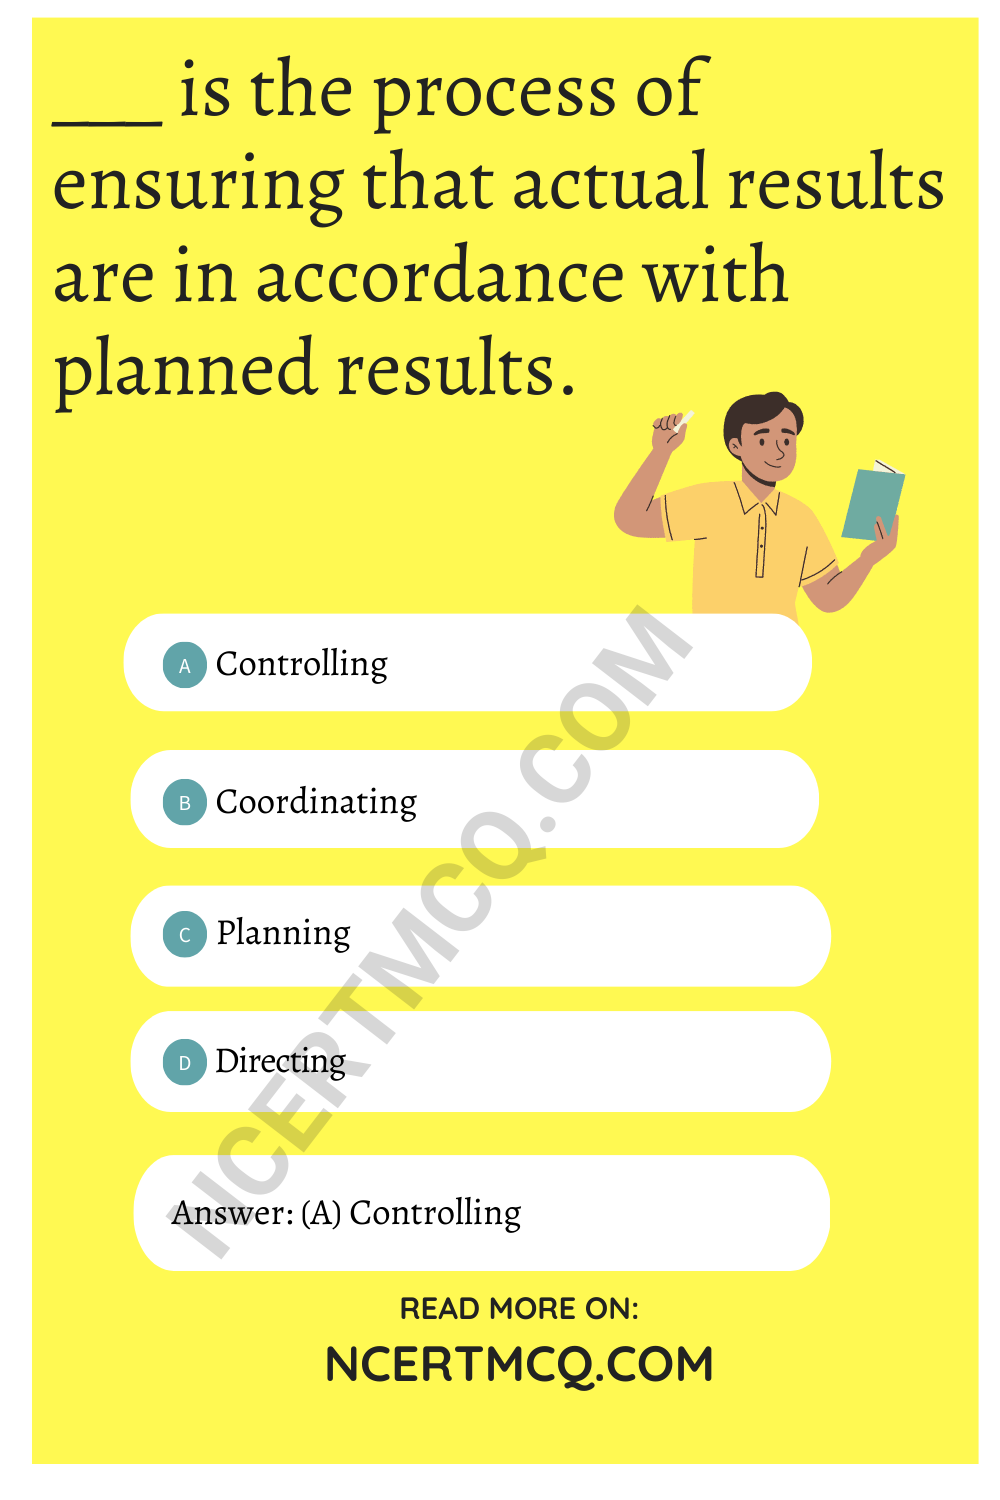 ___ is the process of ensuring that actual results are in accordance with planned results.